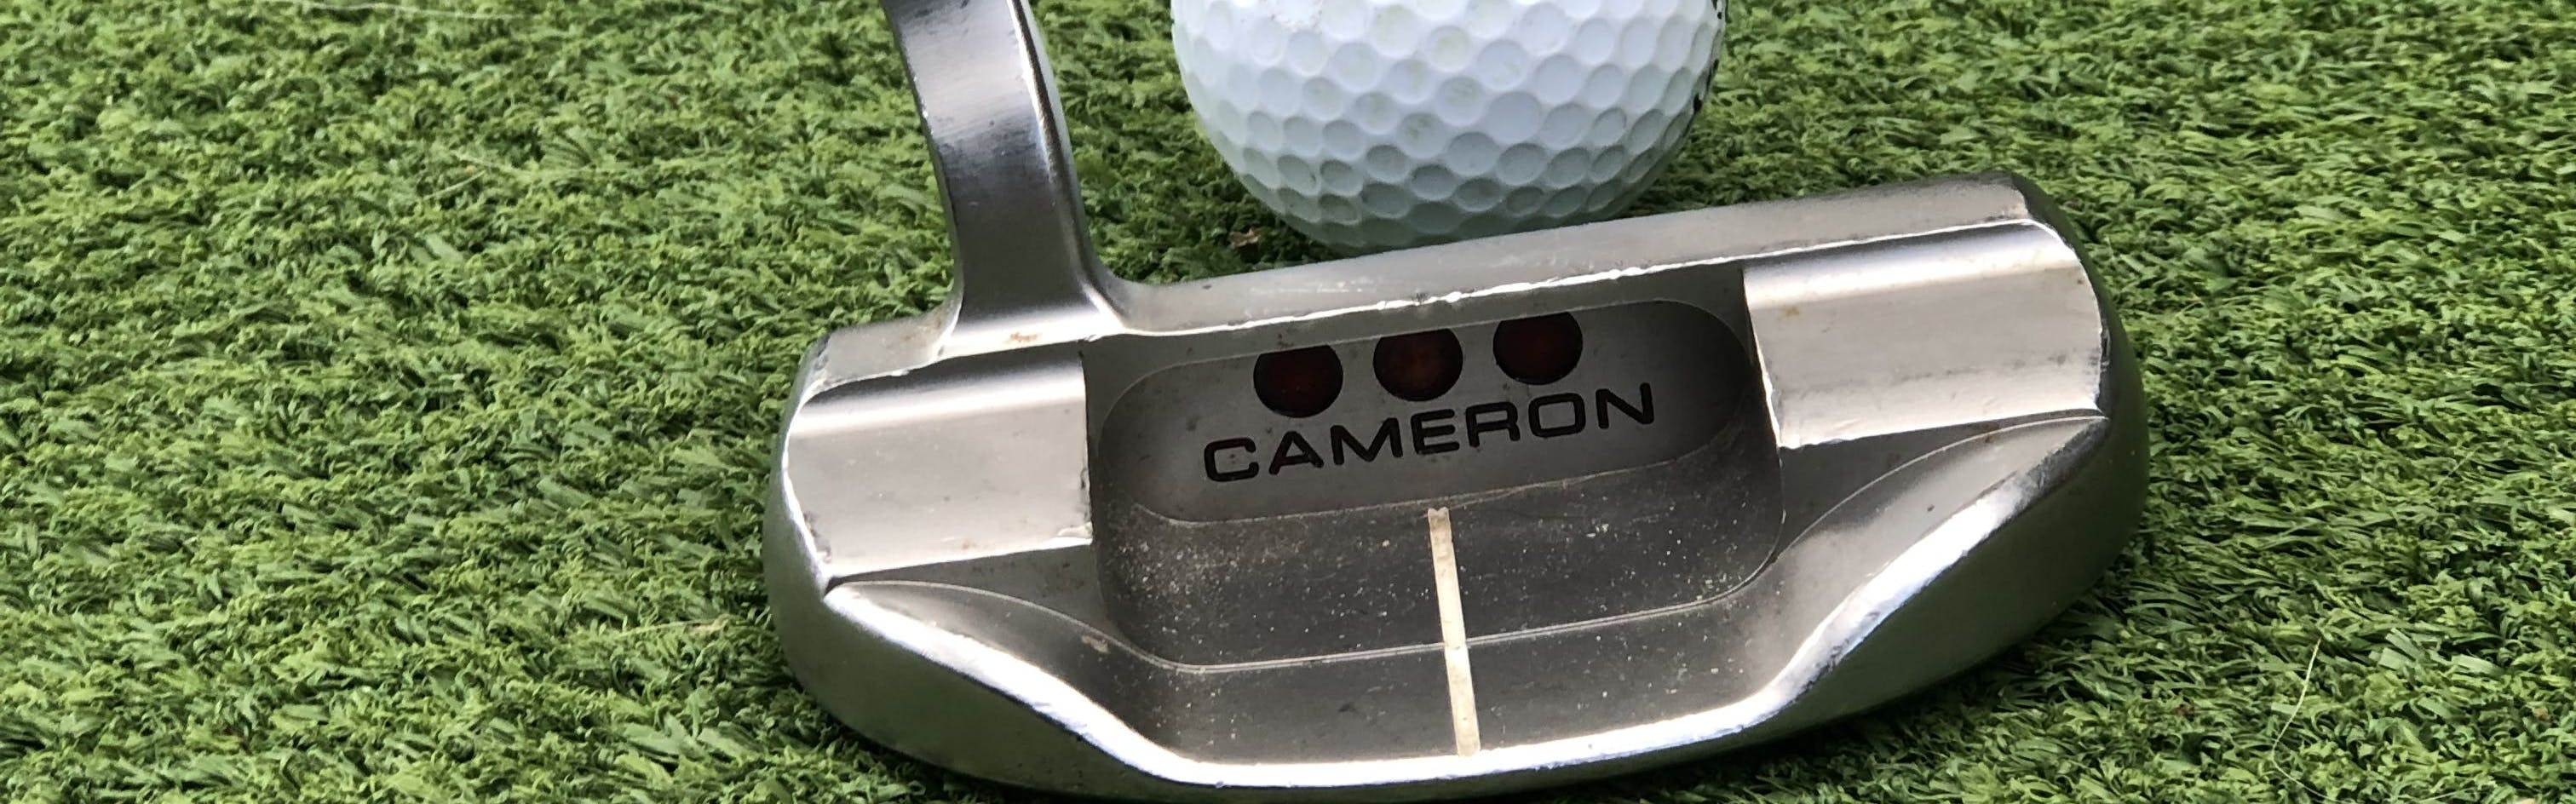 The Scotty Cameron Special Select Fastback 1.5 Putter in front of a golf ball.